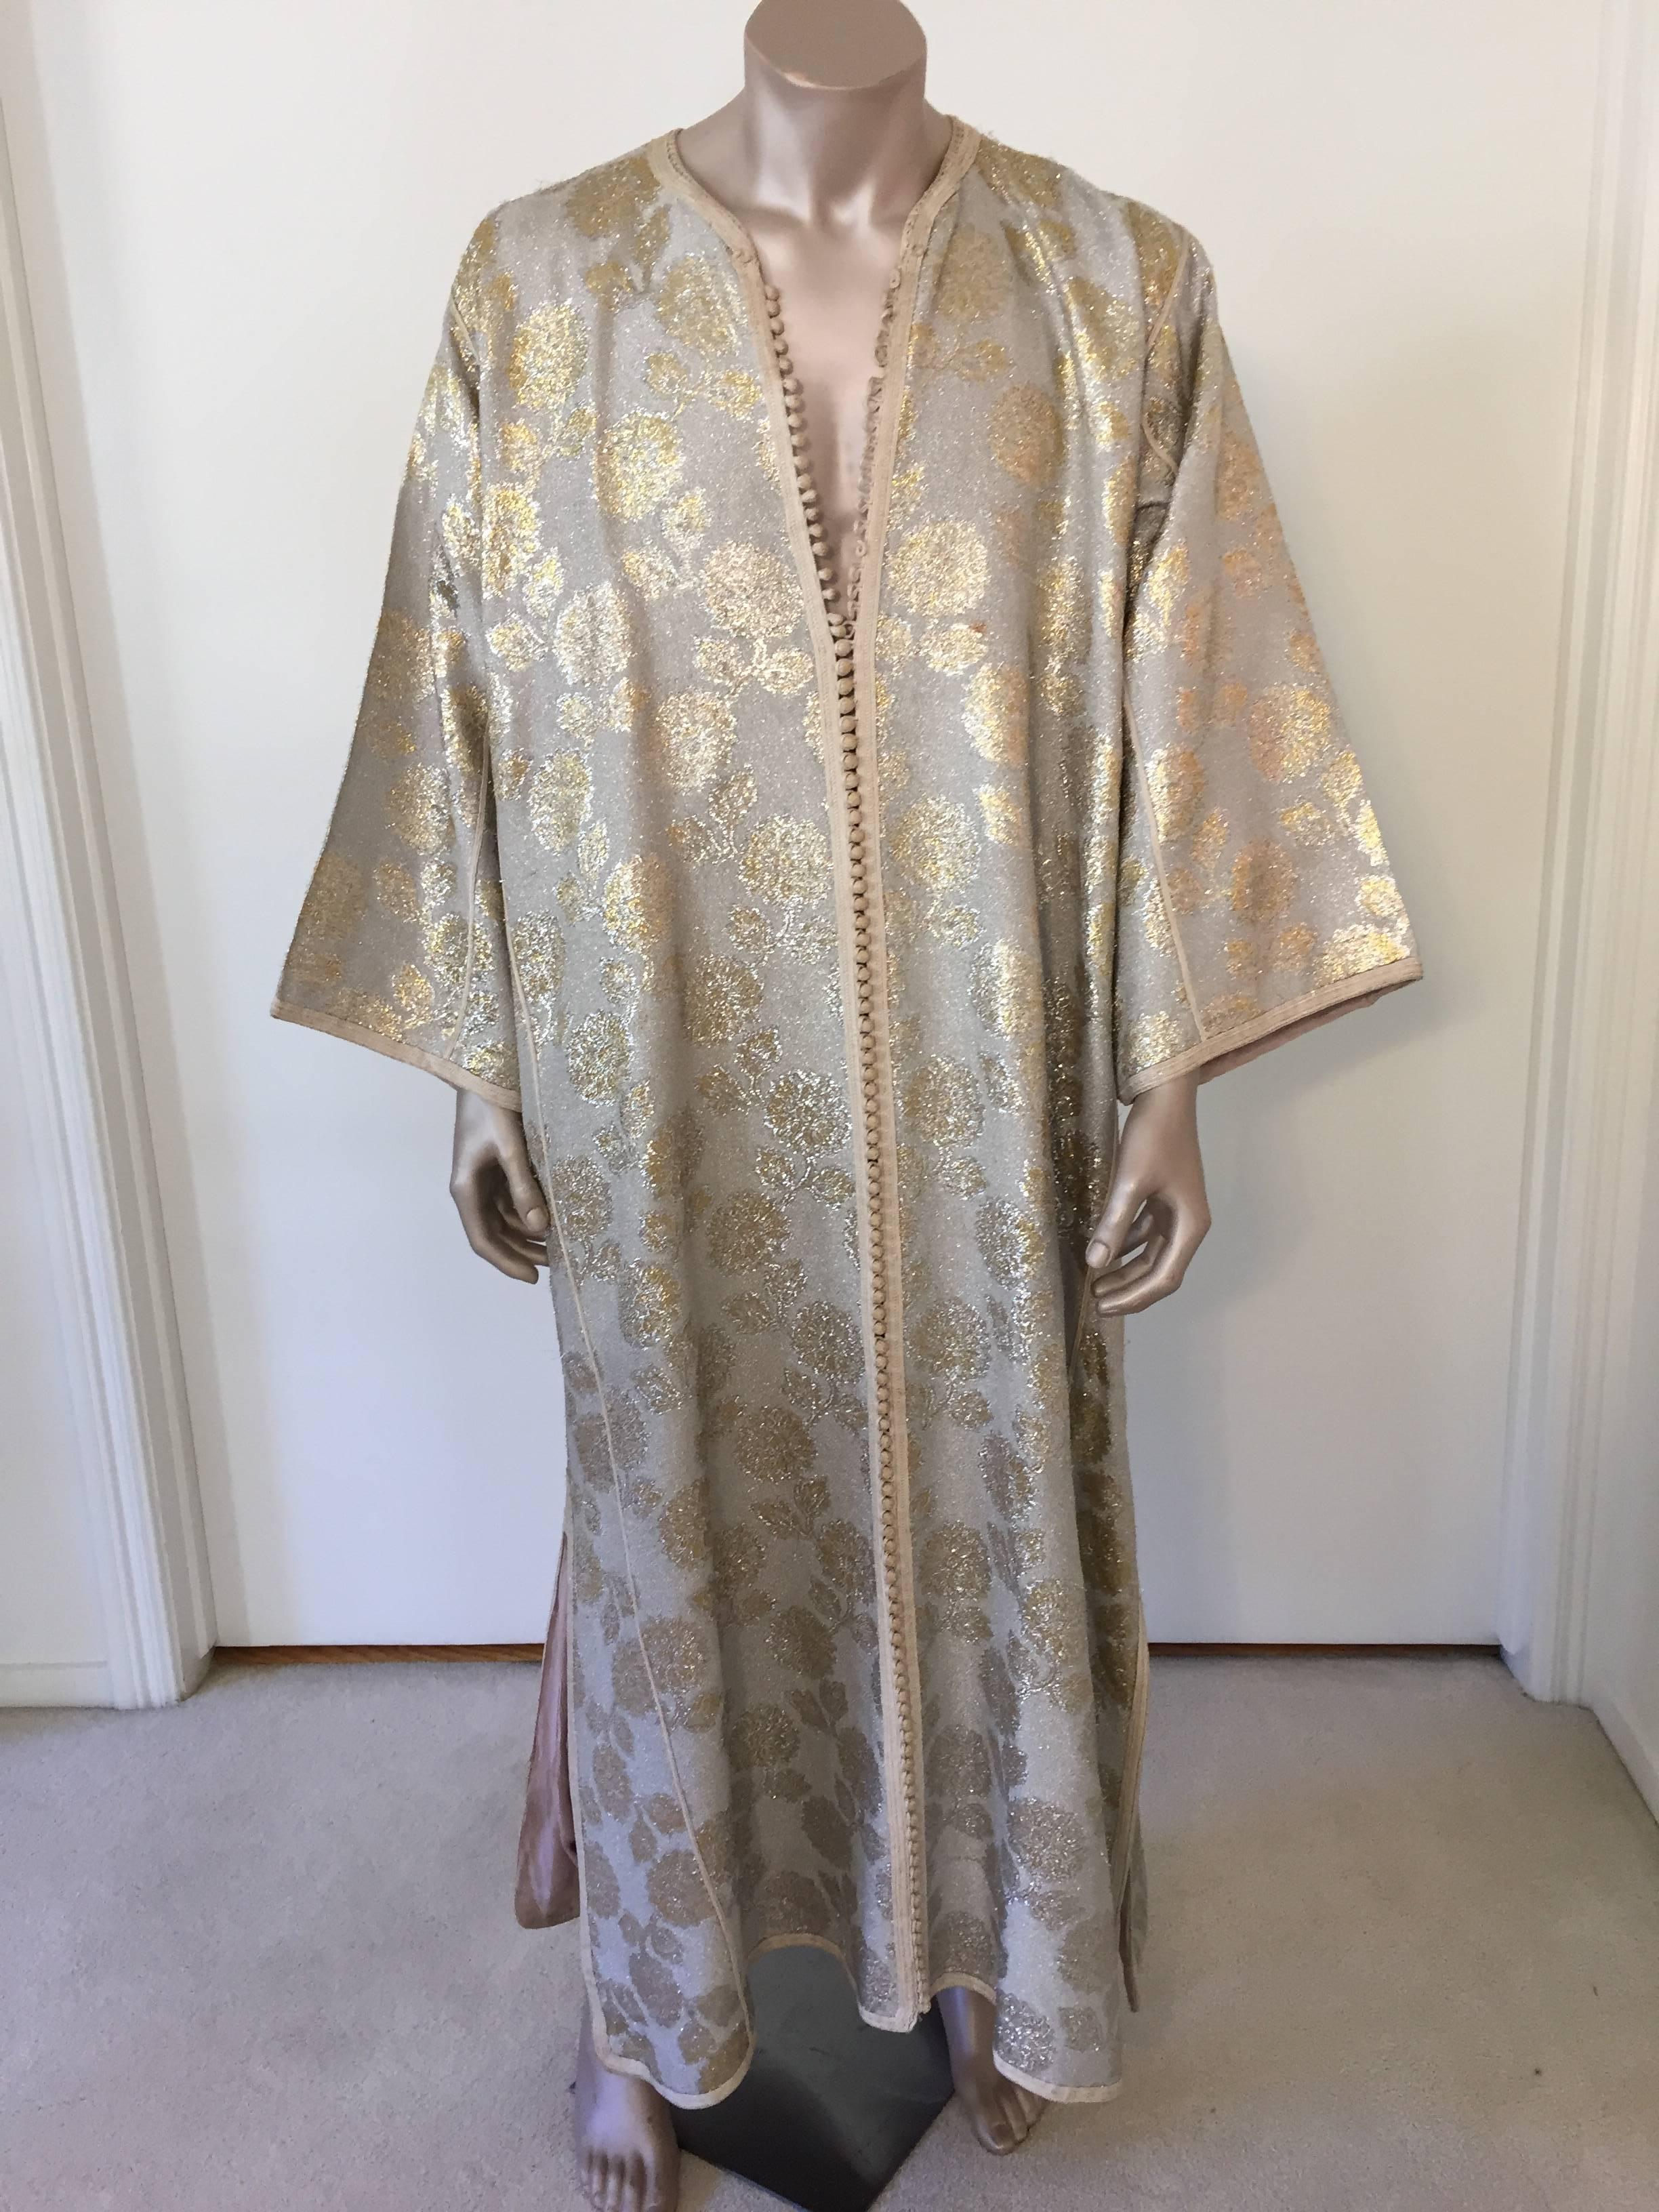 Moroccan gentleman vintage caftan in silver and gold brocade fabric.
One of a kind custom Moroccan Middle Eastern gentleman vintage gown.
This vintage male kaftan features a traditional neckline, with side slits and embellished long sleeves.
In